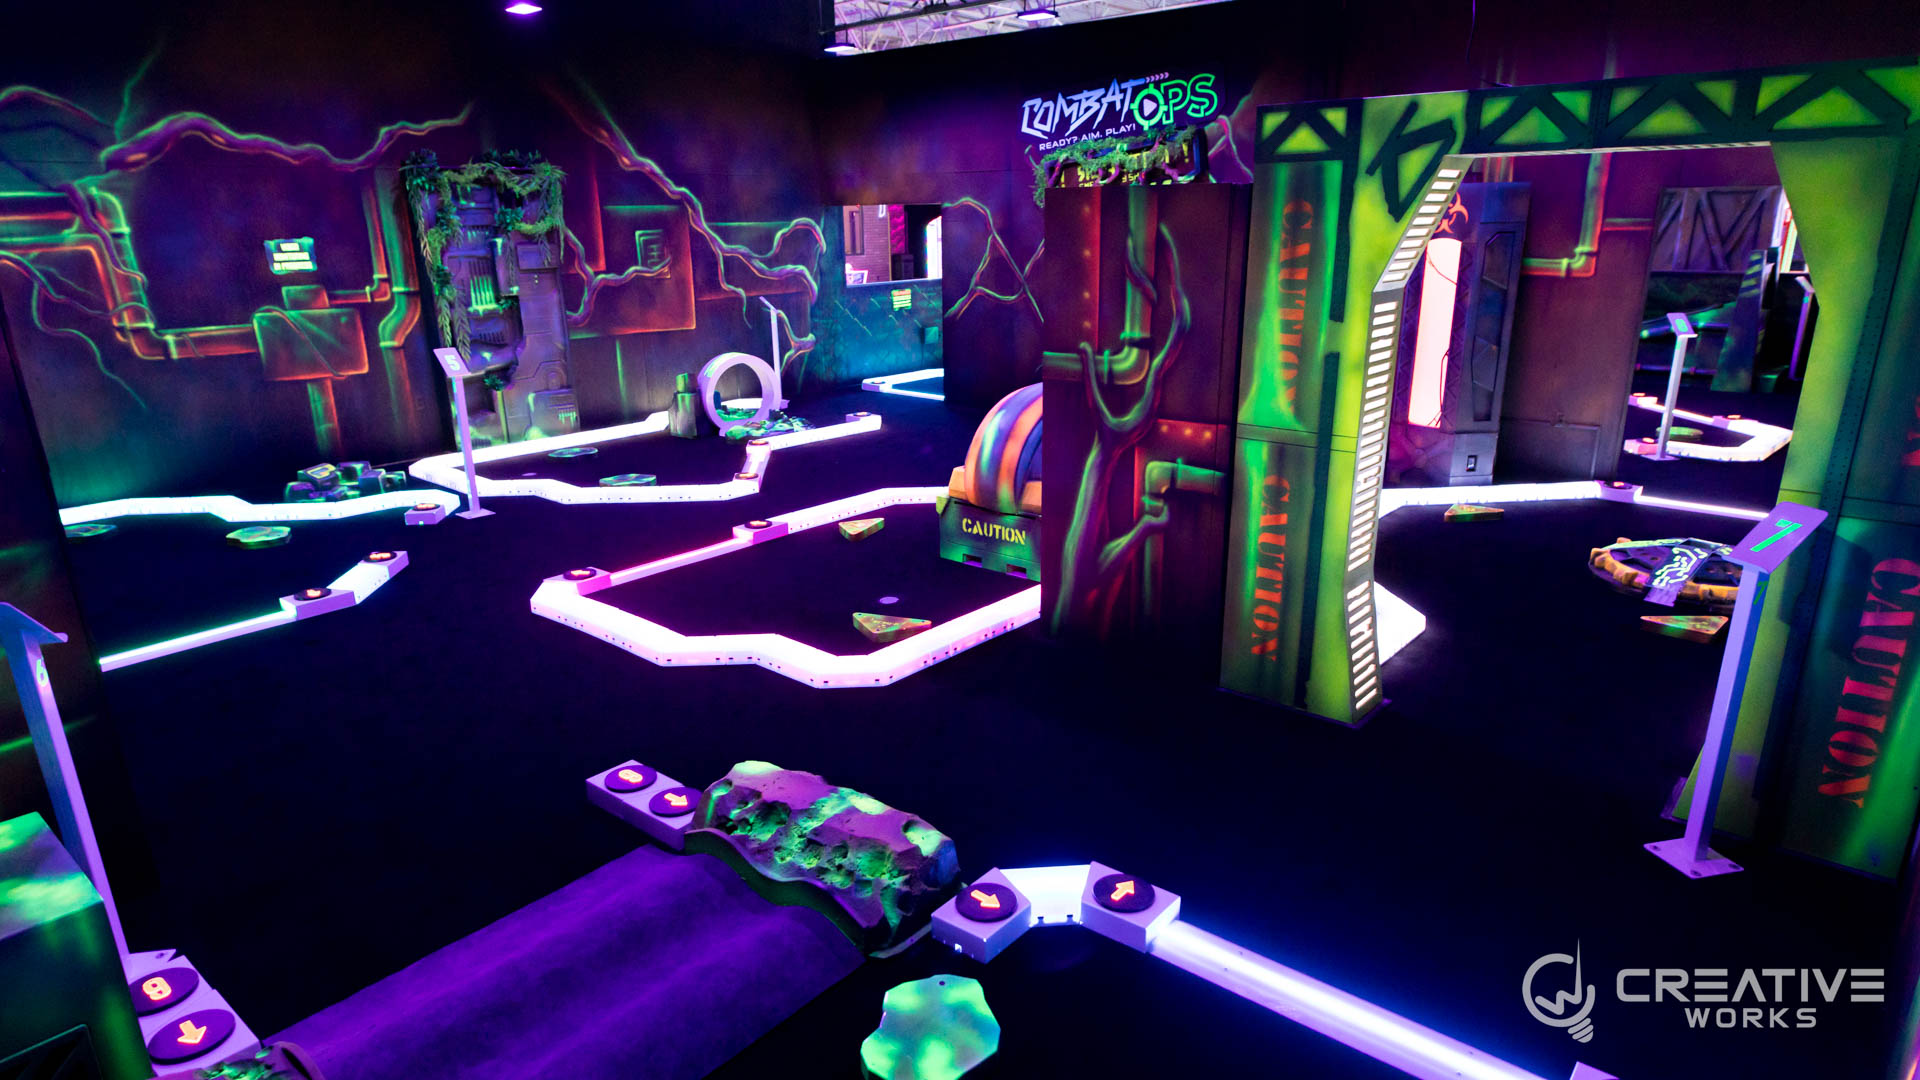 David Dimberio Gives 5 Stars to His Creative Works Mini Golf Course